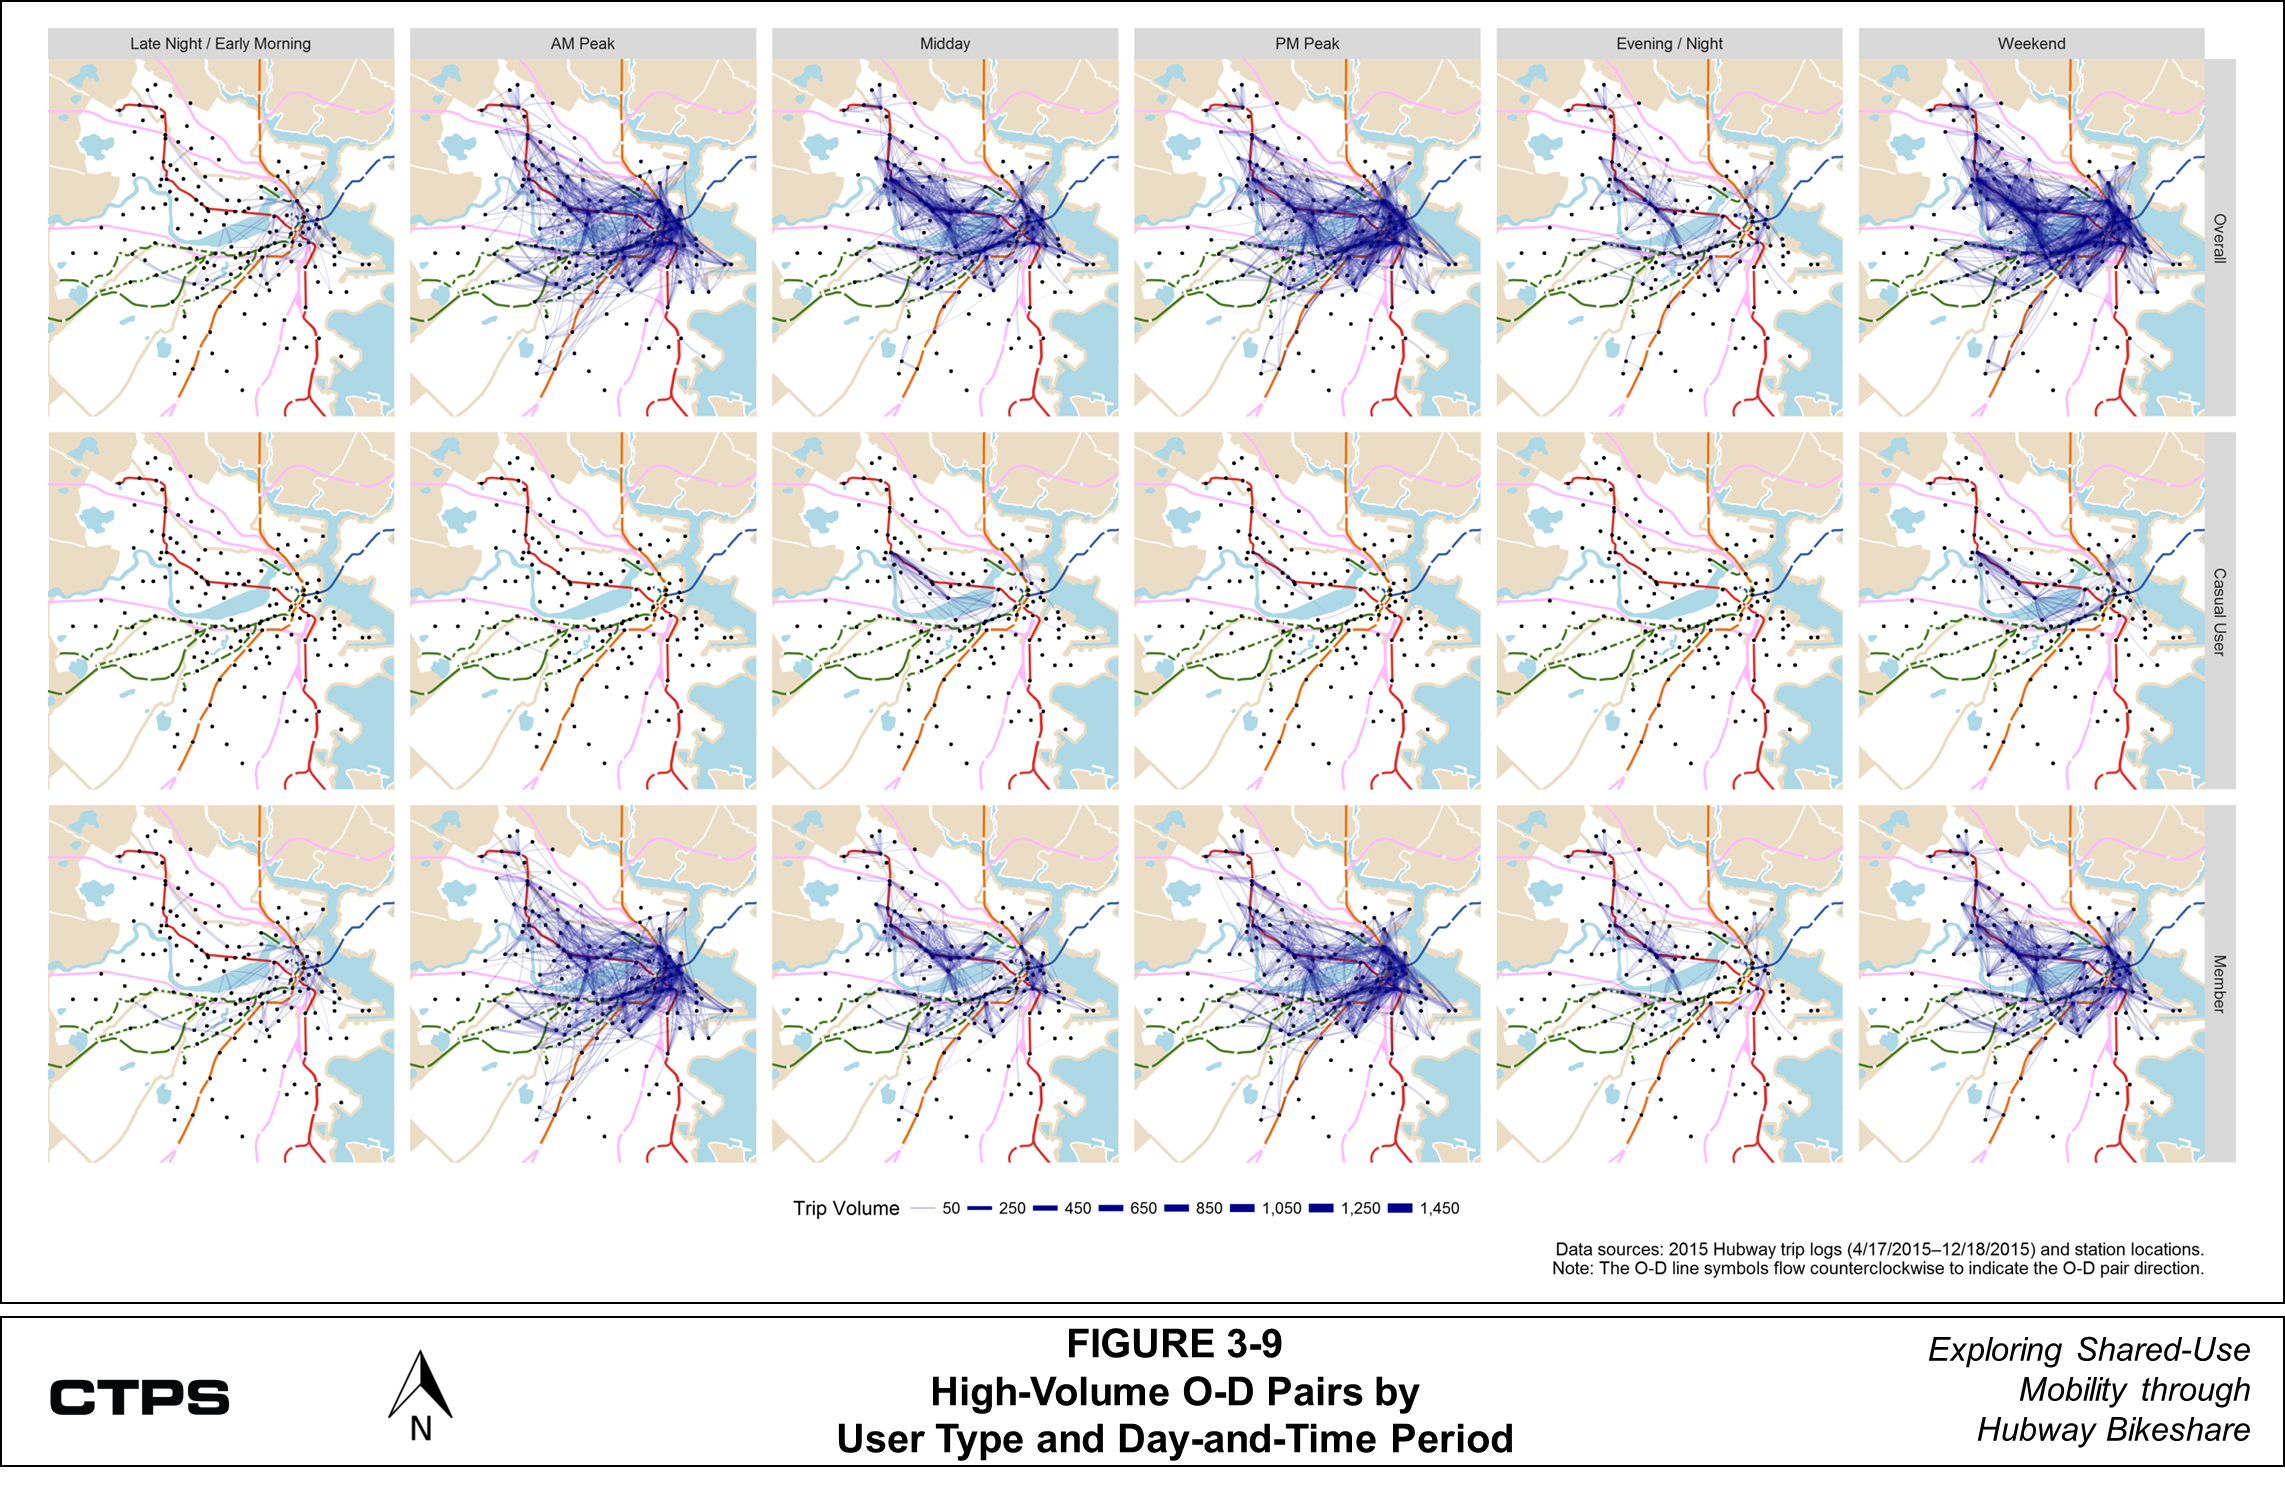 FIGURE 3-9: High Volume O-D Pairs by User Type and Day-and-Time Period: This series of 18 maps shows Hubway trip origin-destination (O-D) pairs identified in Hubway trip data, categorized by trip volume. Each map reflects trips made by a particular user group (member, casual user or both) and day-and-time period. These origin-destination pairs are based on trips taken between April 17, 2015 and December 18, 2015.  